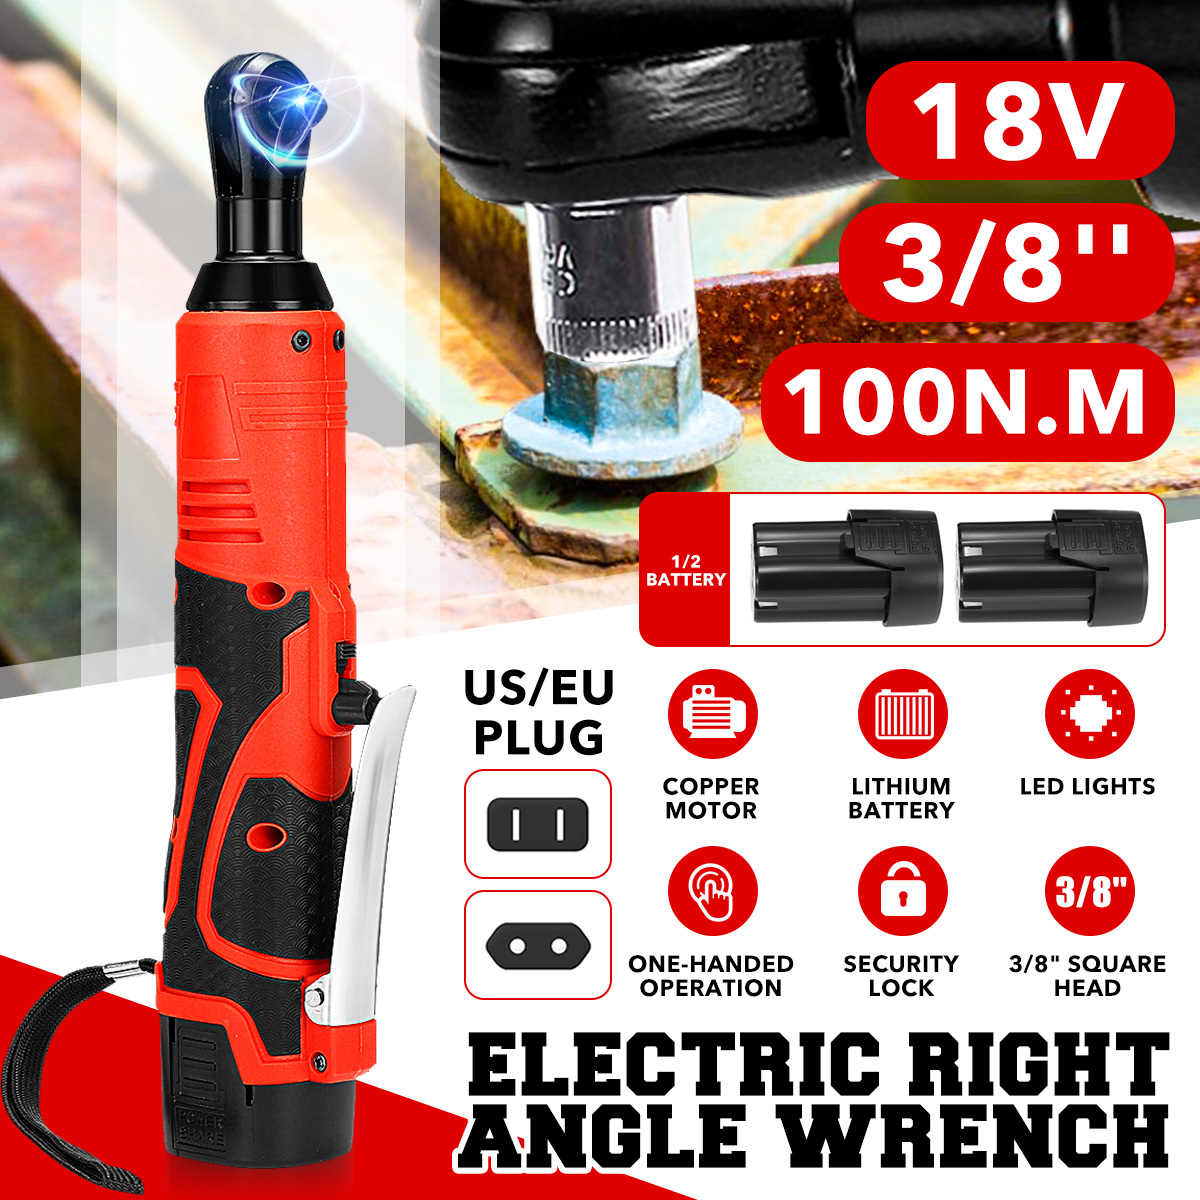 38Inch-Cordless-Ratchet-Wrench-18V-100NM-Electric-Ratchet-Wrench-Kit-w-12pcs-Battery-1845669-2